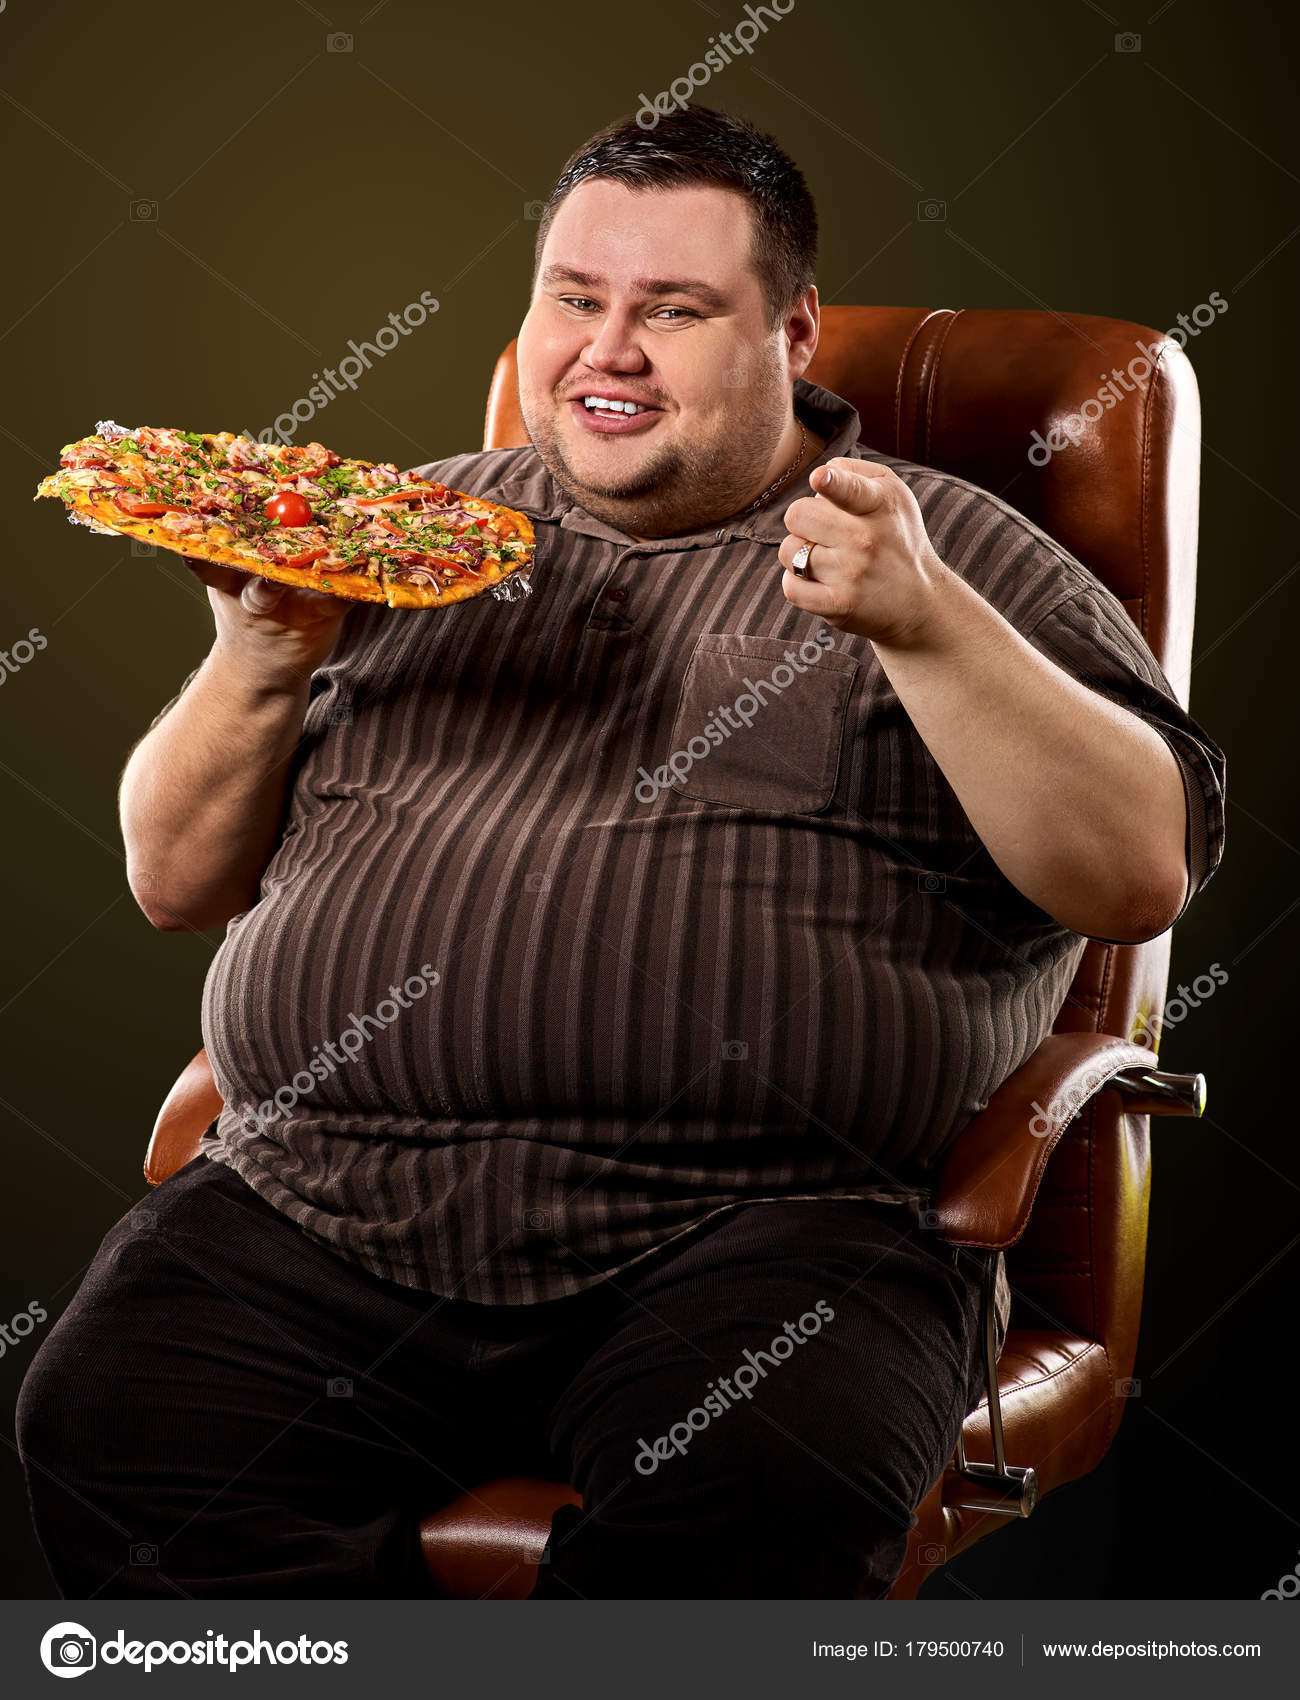 fat person eating